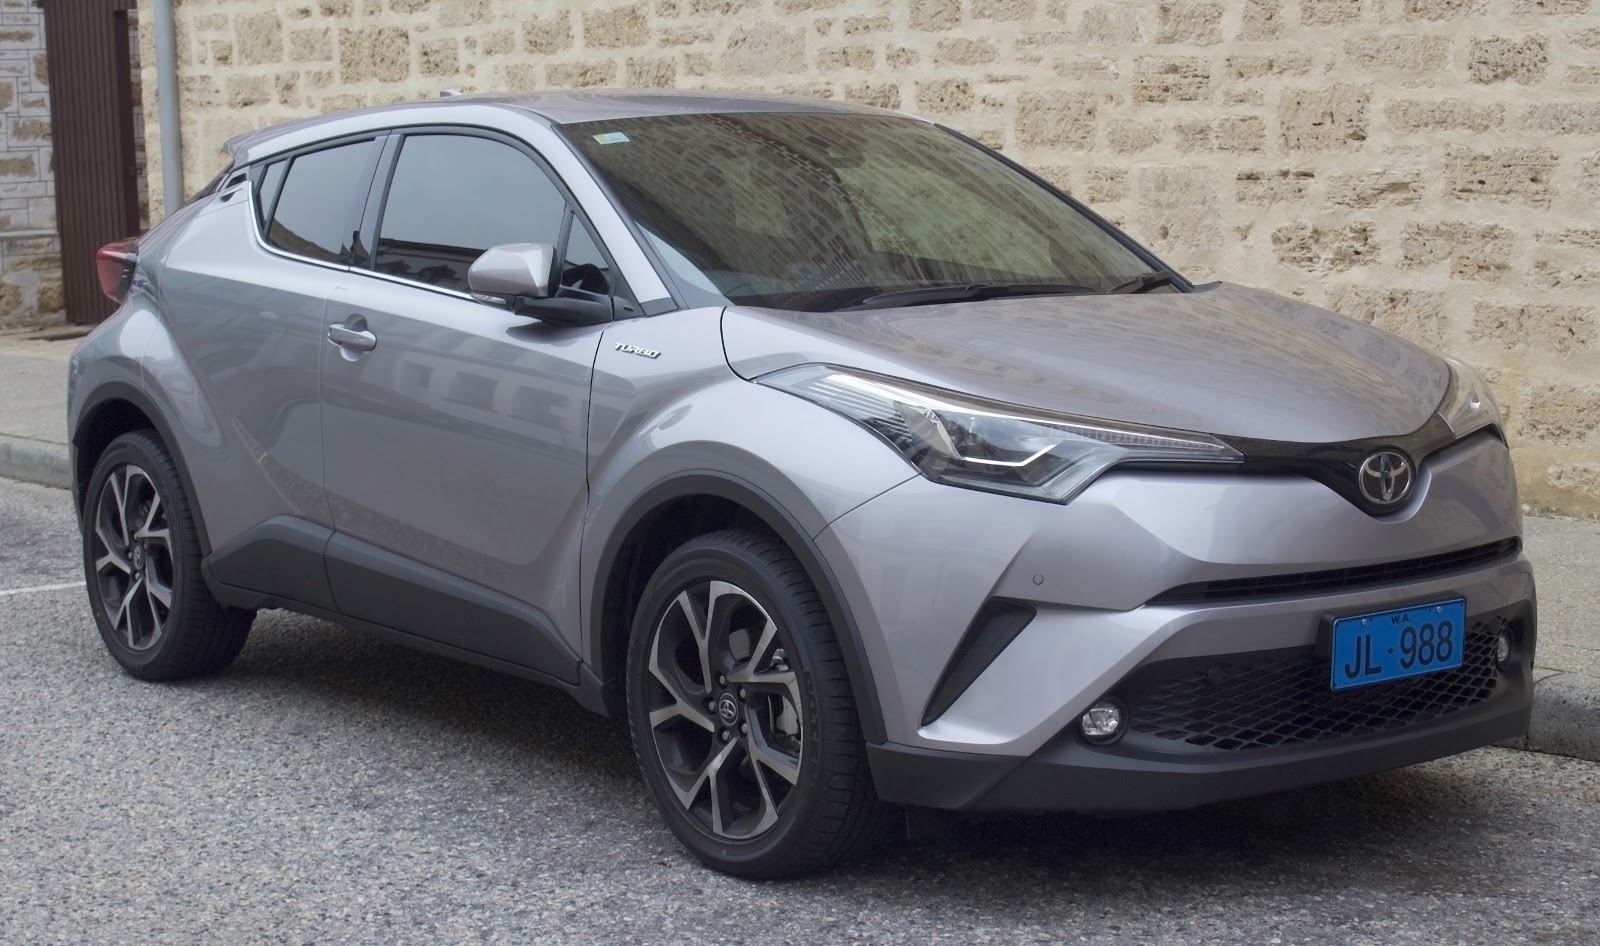 Why Toyota Discontinued The C-HR In The US After 5 Years